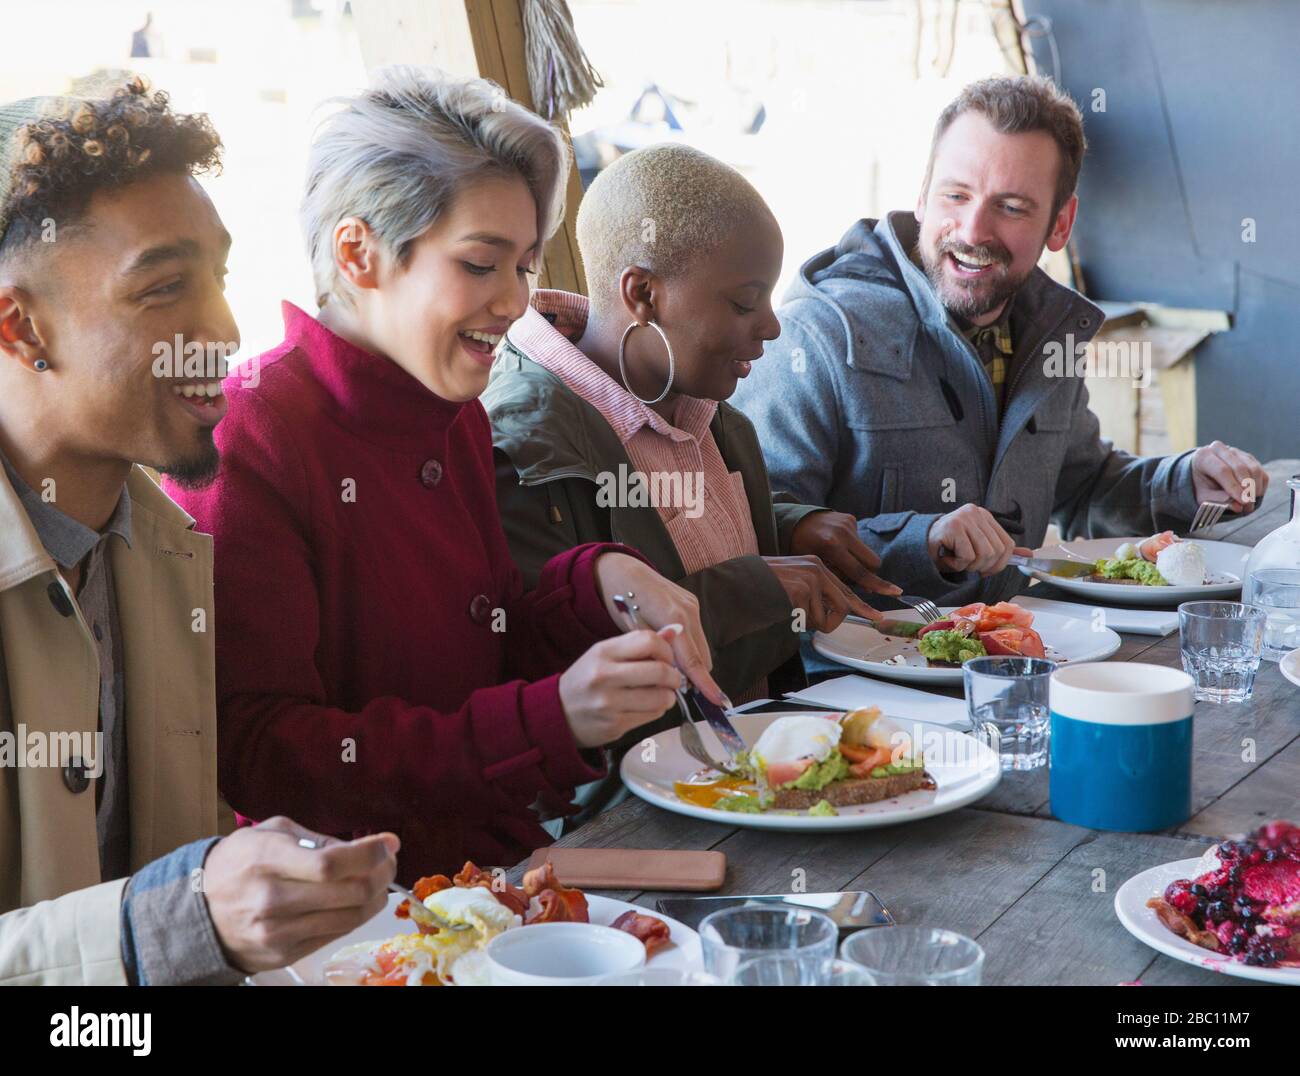 Friends eating breakfast at restaurant outdoor patio Stock Photo